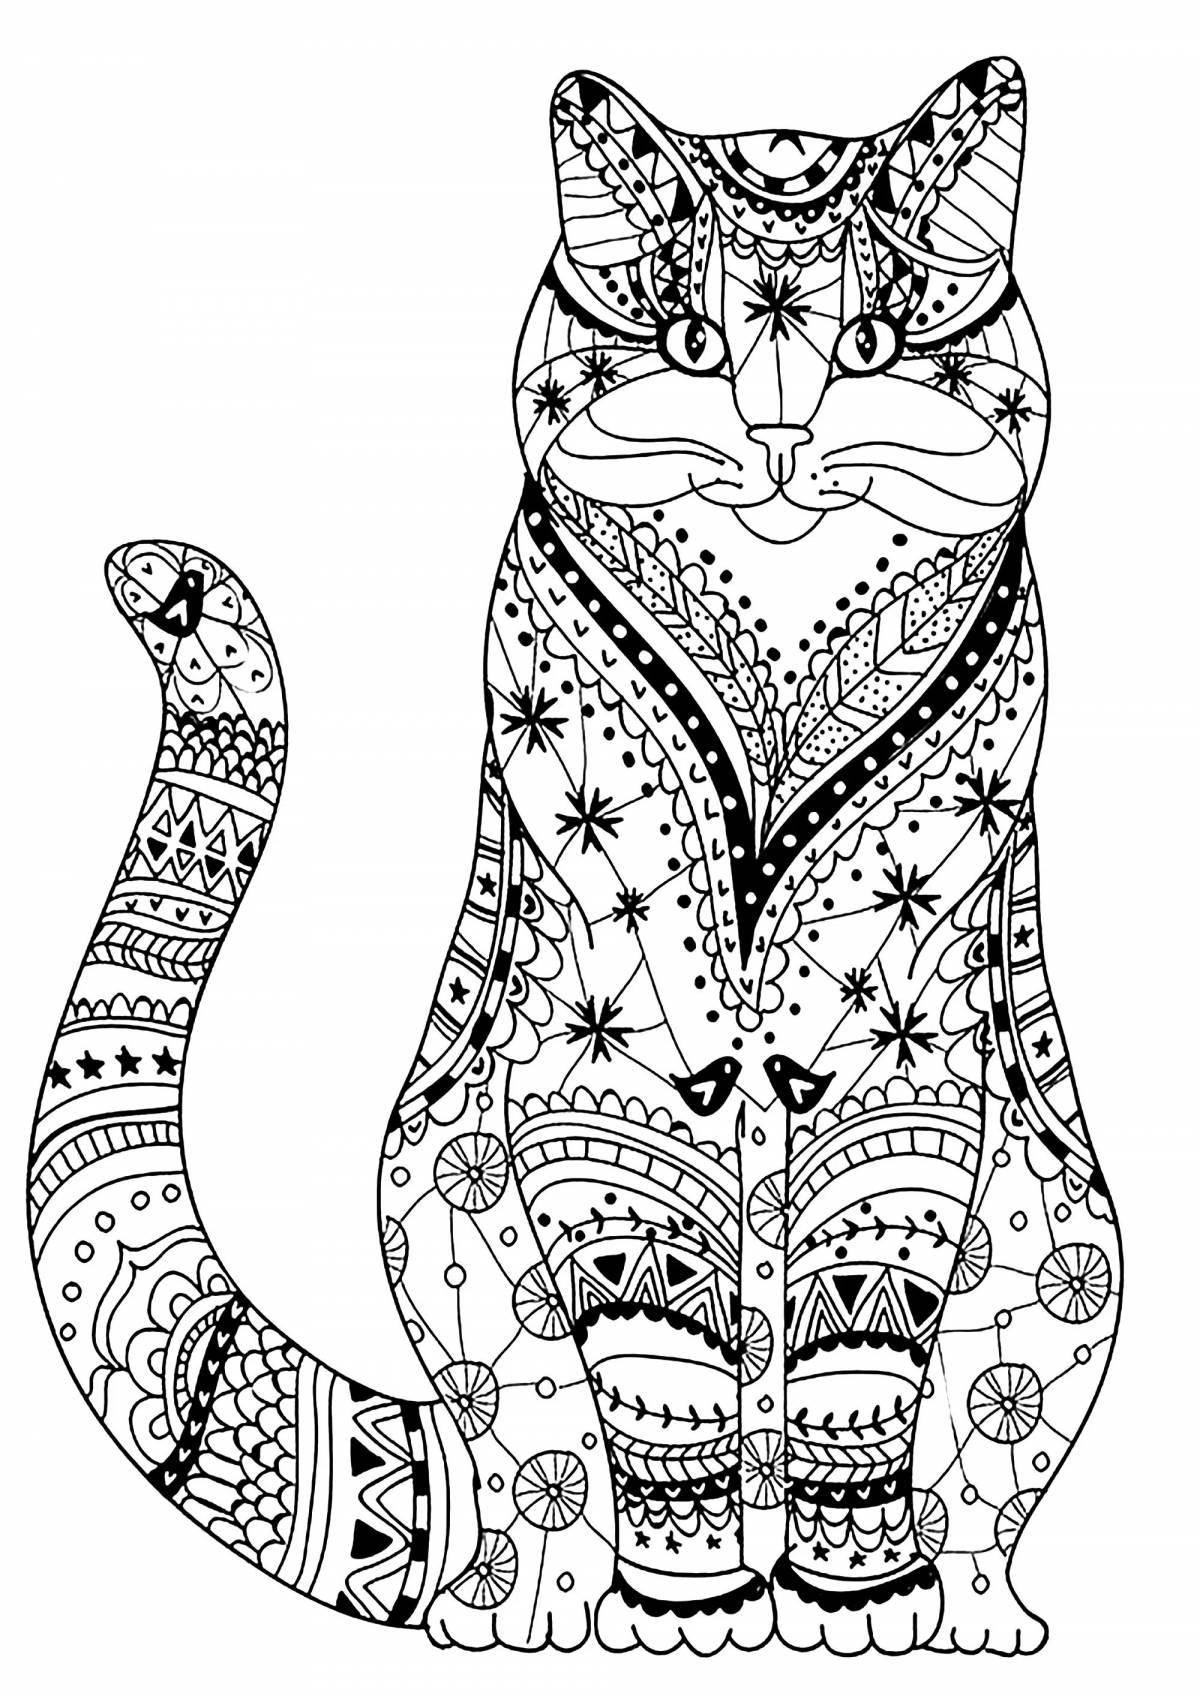 Tempting animal coloring pages for adults